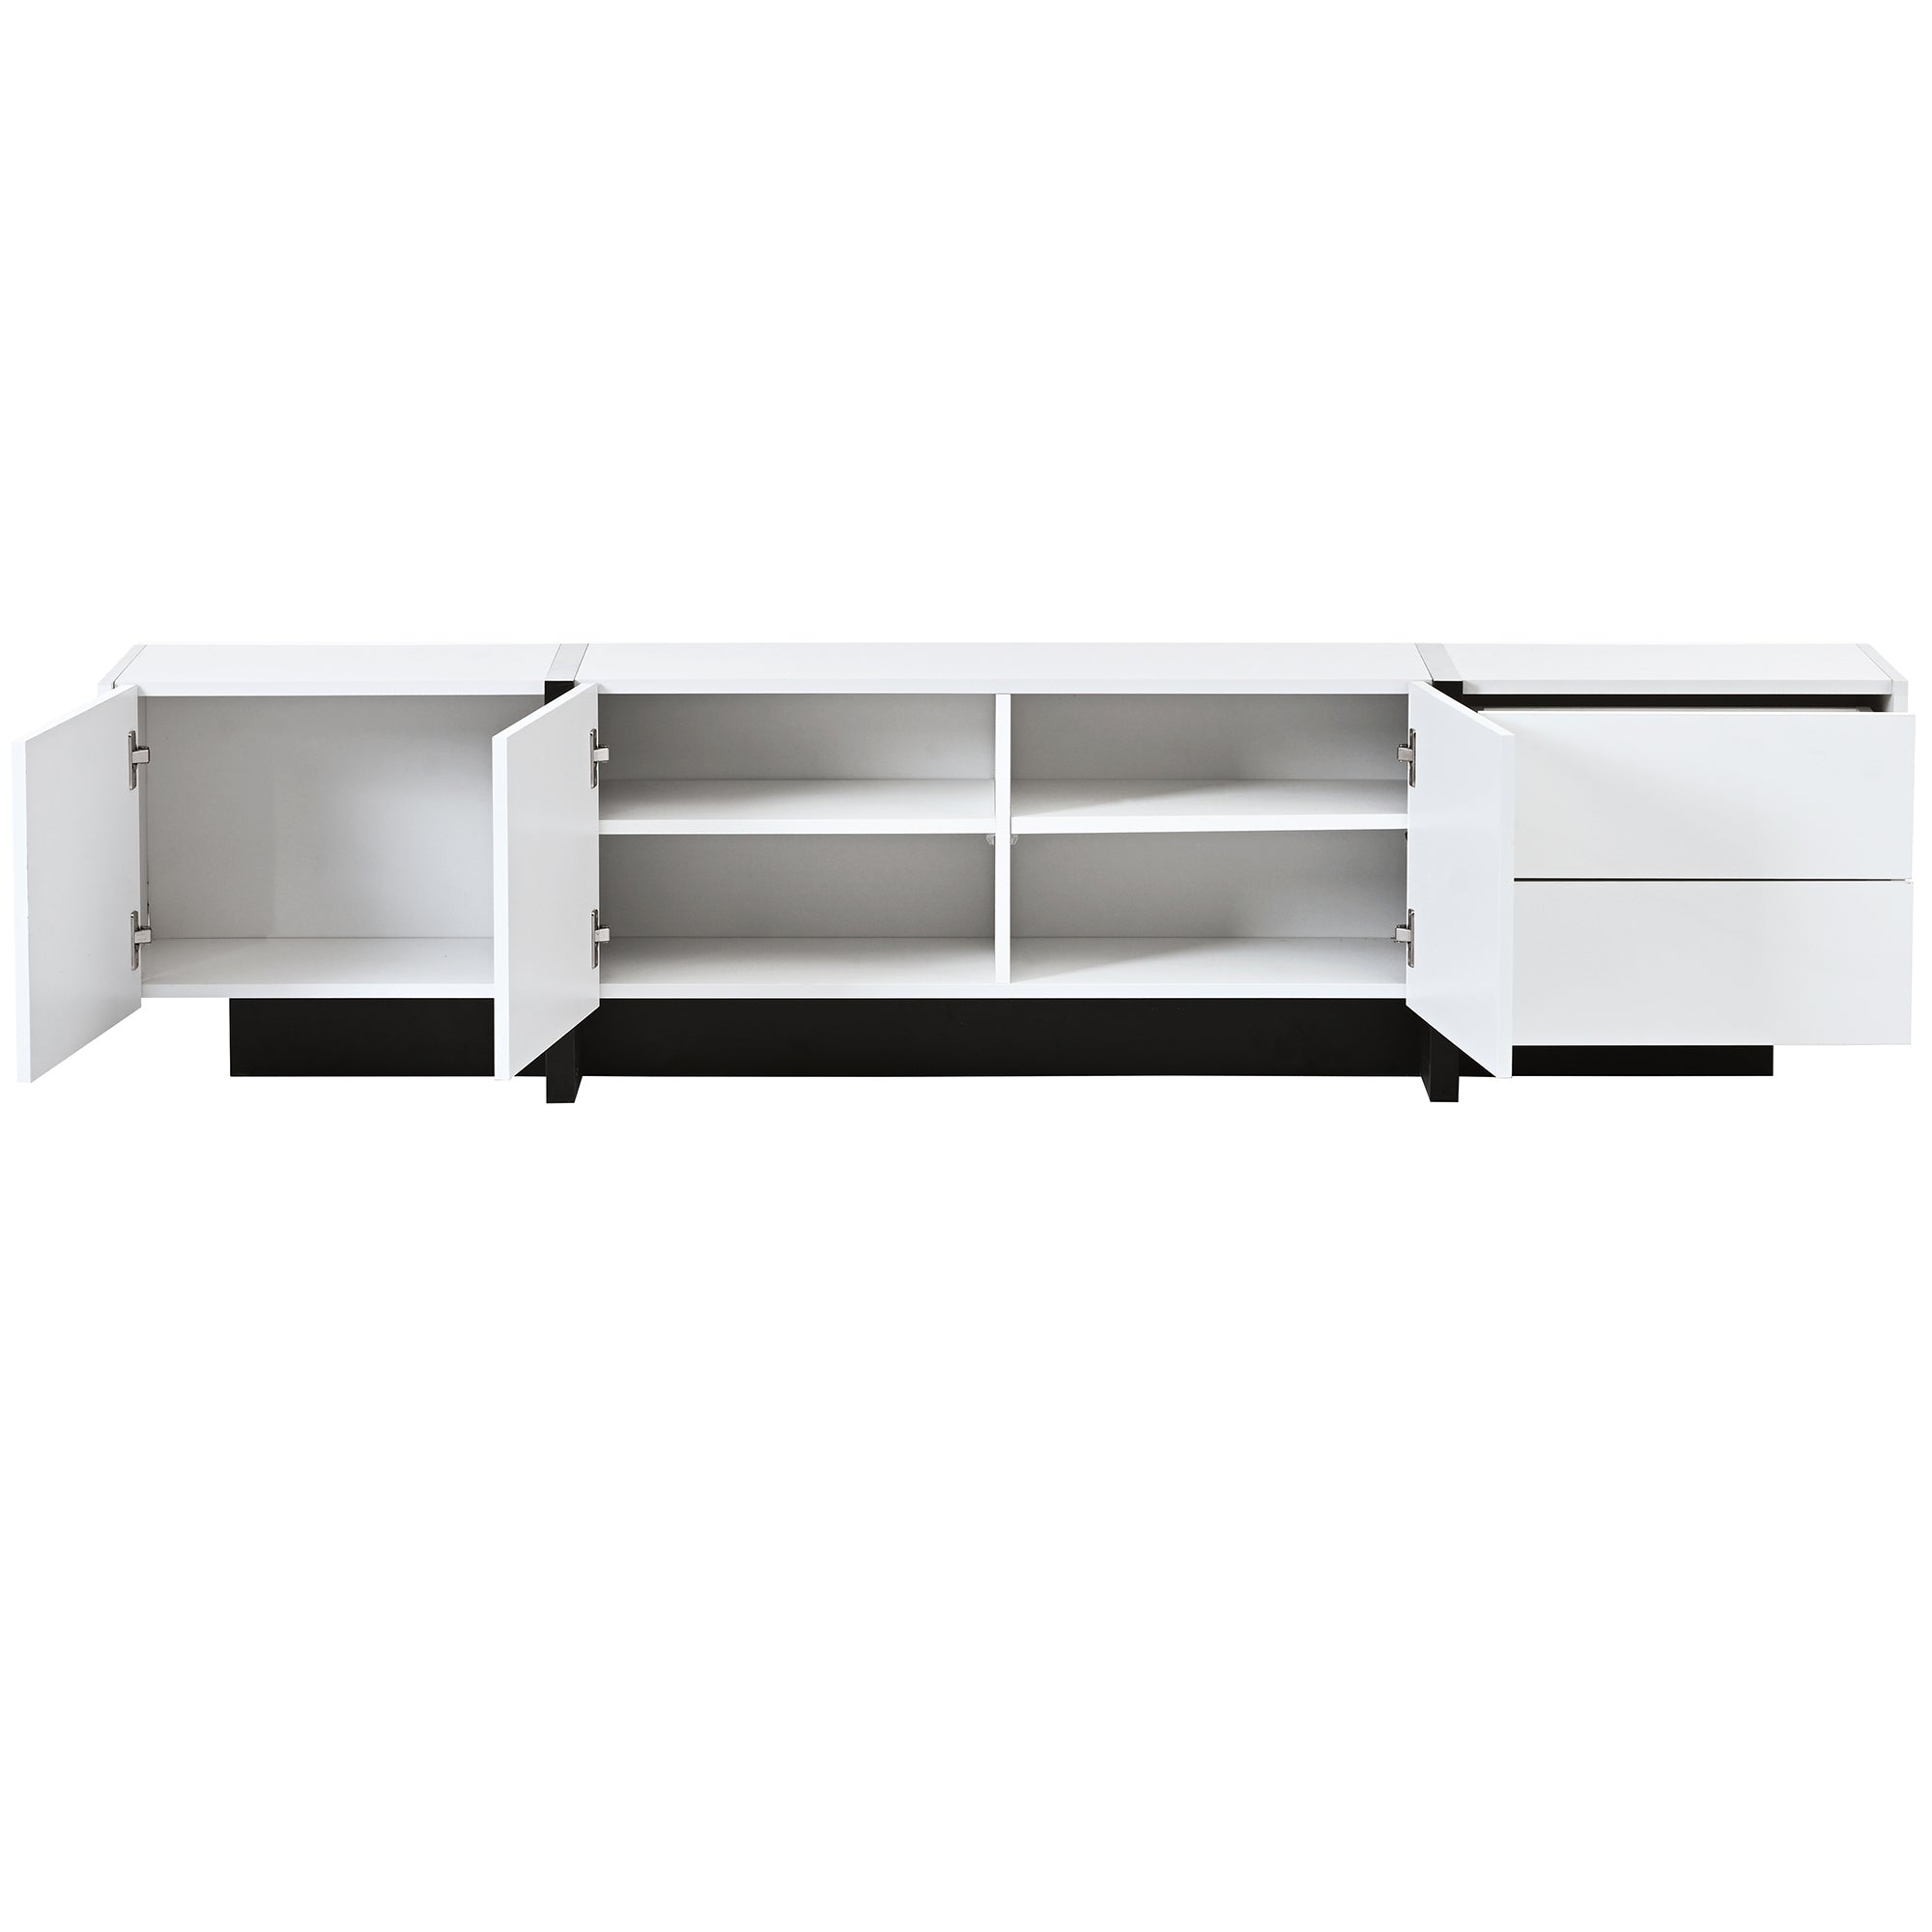 Contemporary Design TV Stand for TVs Up to 80” with High Gloss UV Surface - White & Black